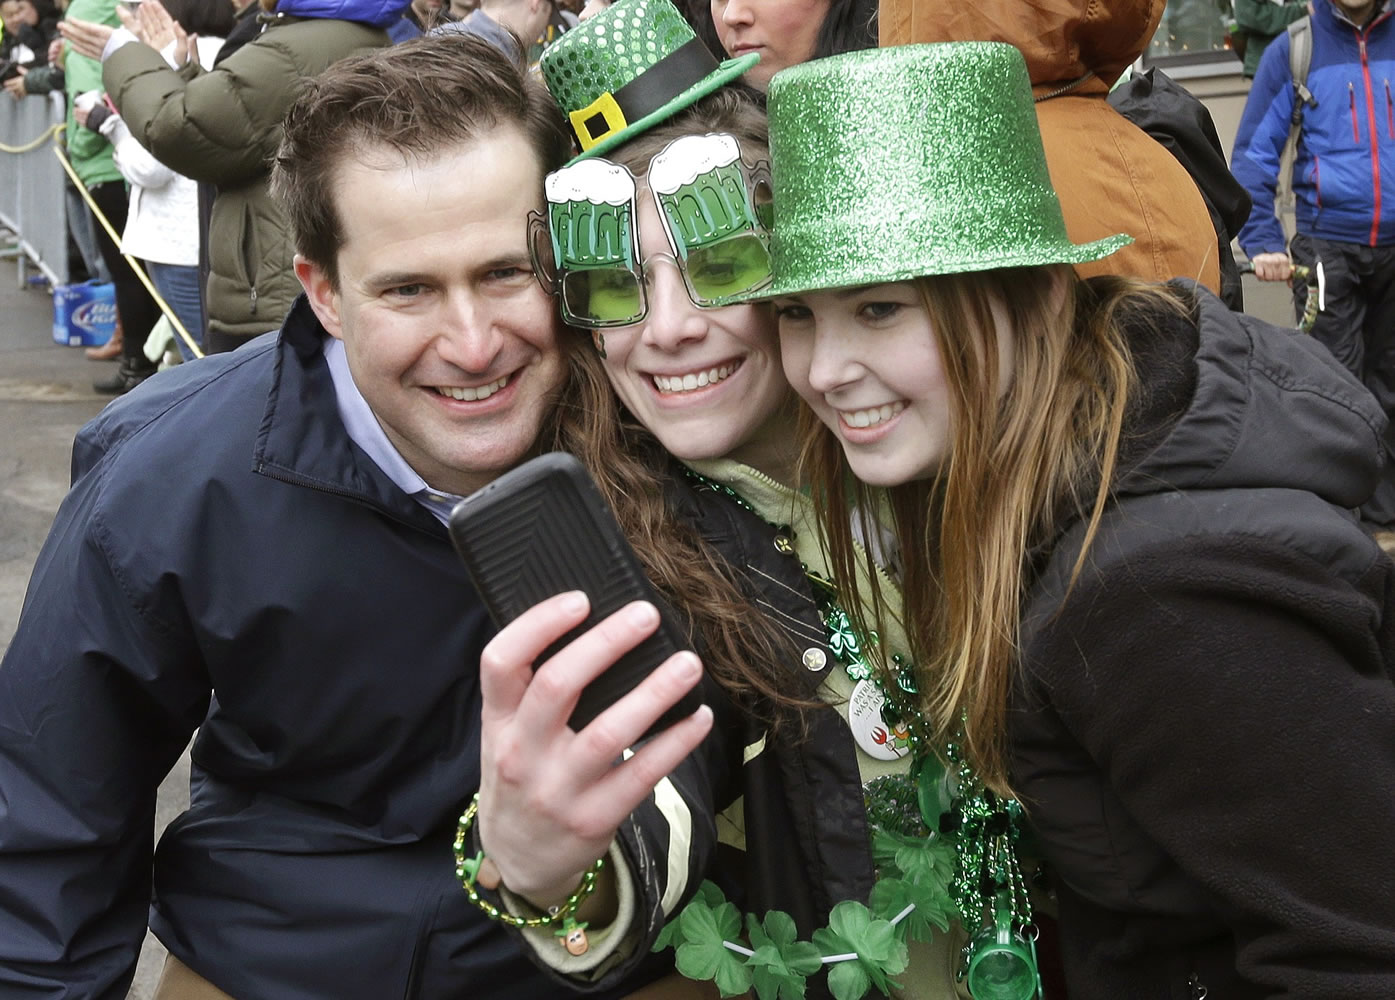 U.S. Rep. Seth Moulton, D-Mass., left, poses for a photo with spectators while marching Sunday in the St. Patrick's Day parade in Boston's South Boston neighborhood.